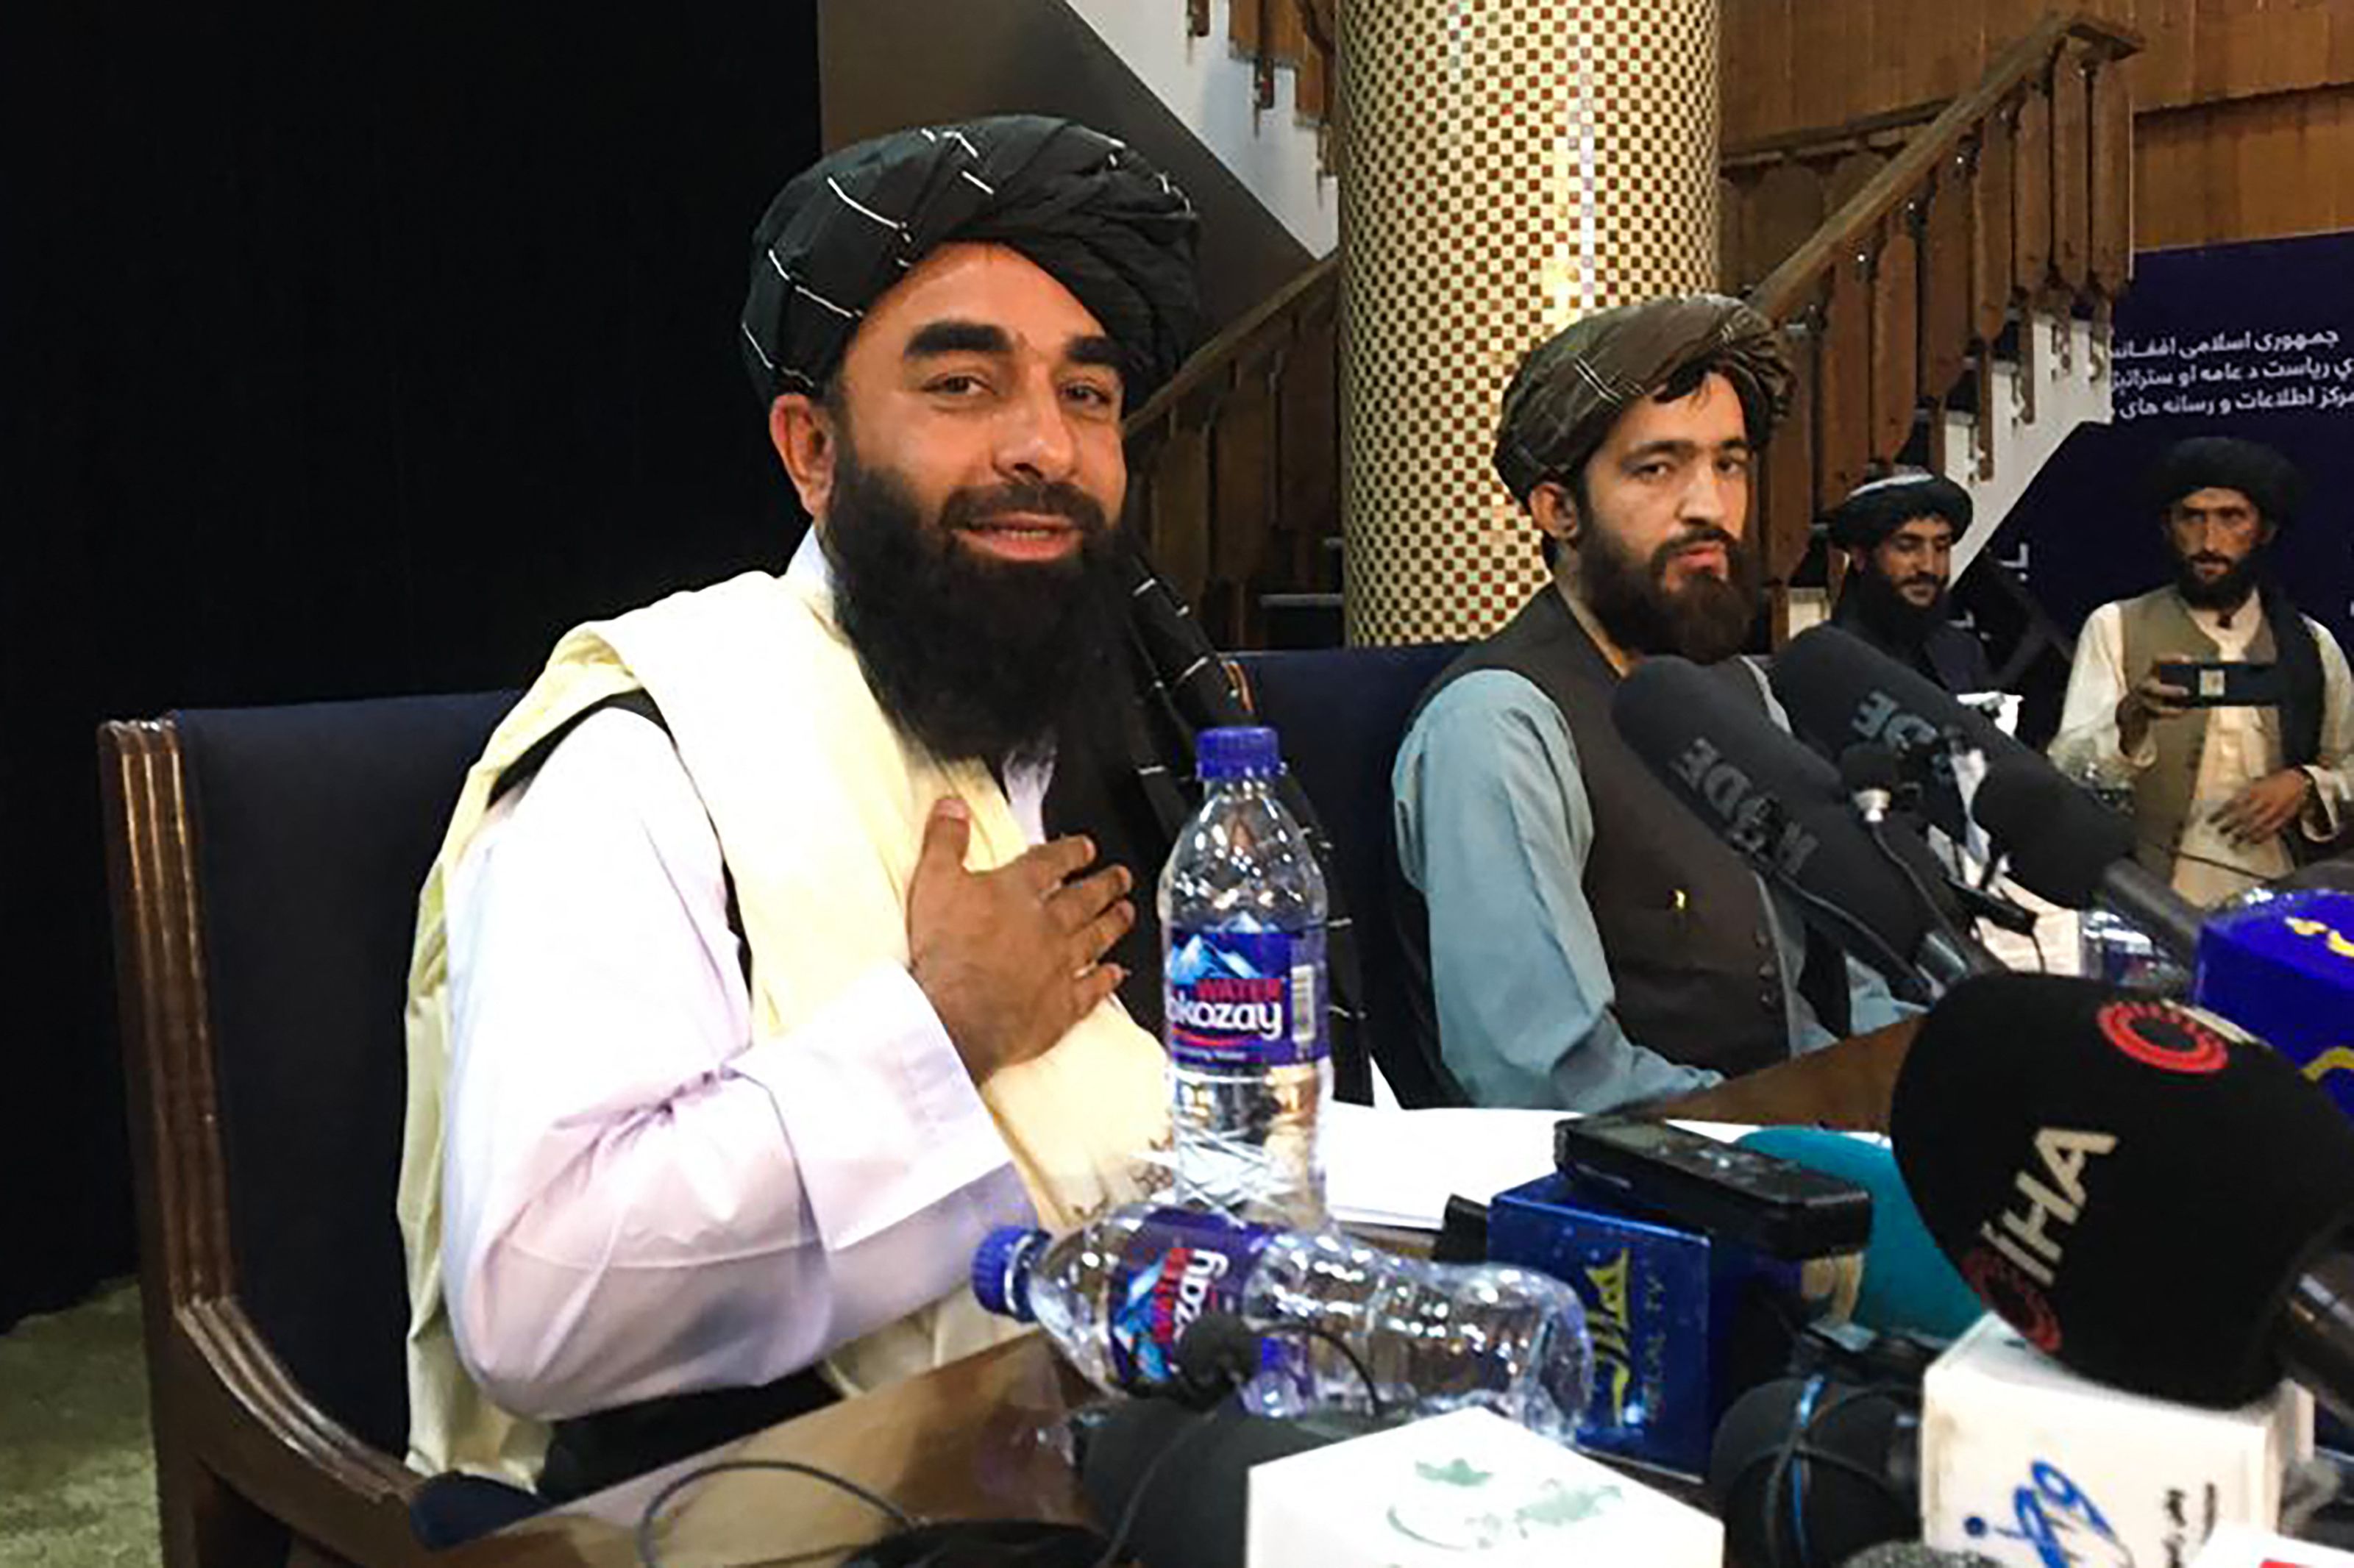 Taliban spokesperson Zabihullah Mujahid (L) attends the first press conference in Kabul on August 17